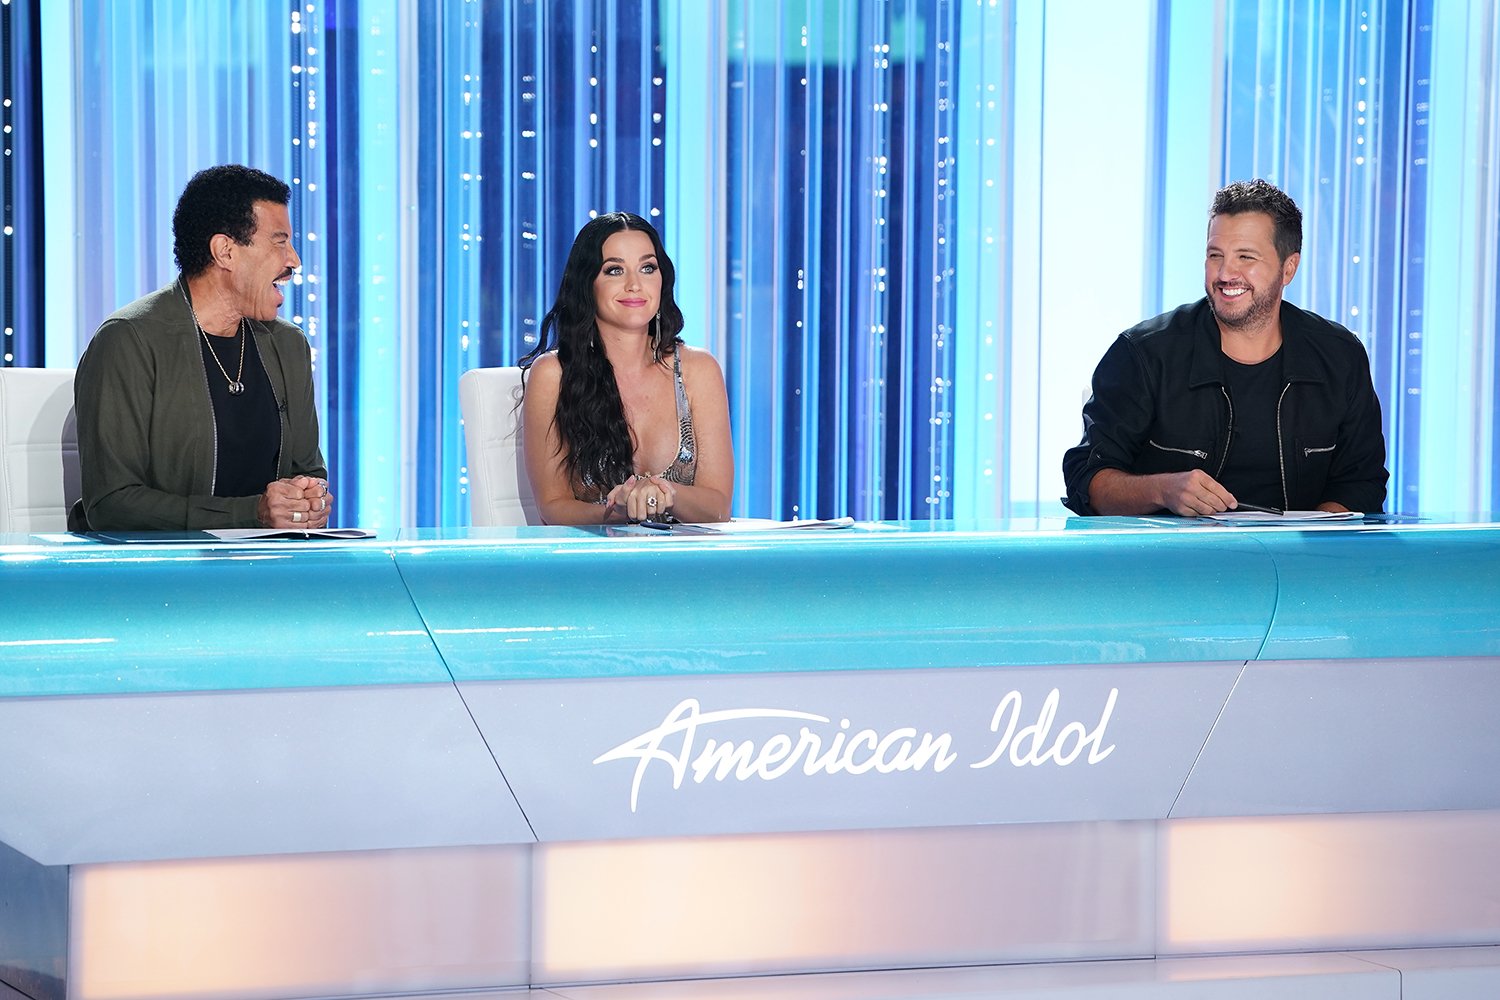 American Idol Season 21: Lionel Richie, Katy Perry, and Luke Bryan sit at the judges' table